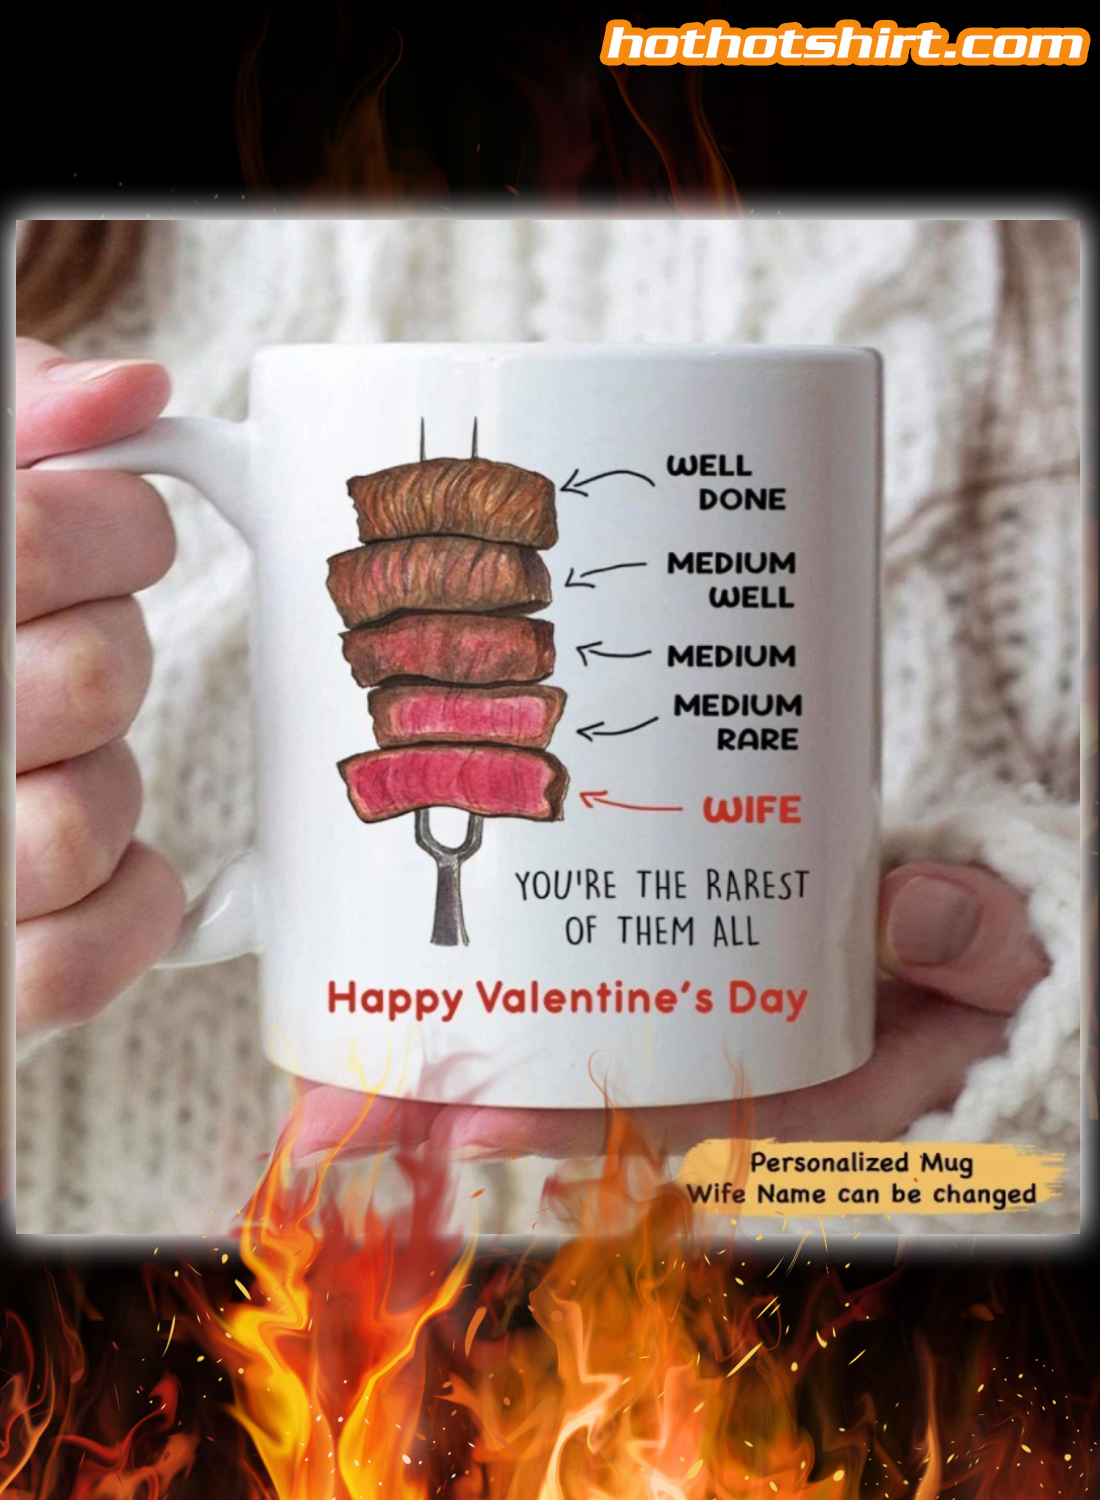 Personalized wife you're the rarest of them all happy valentine's day mug 2